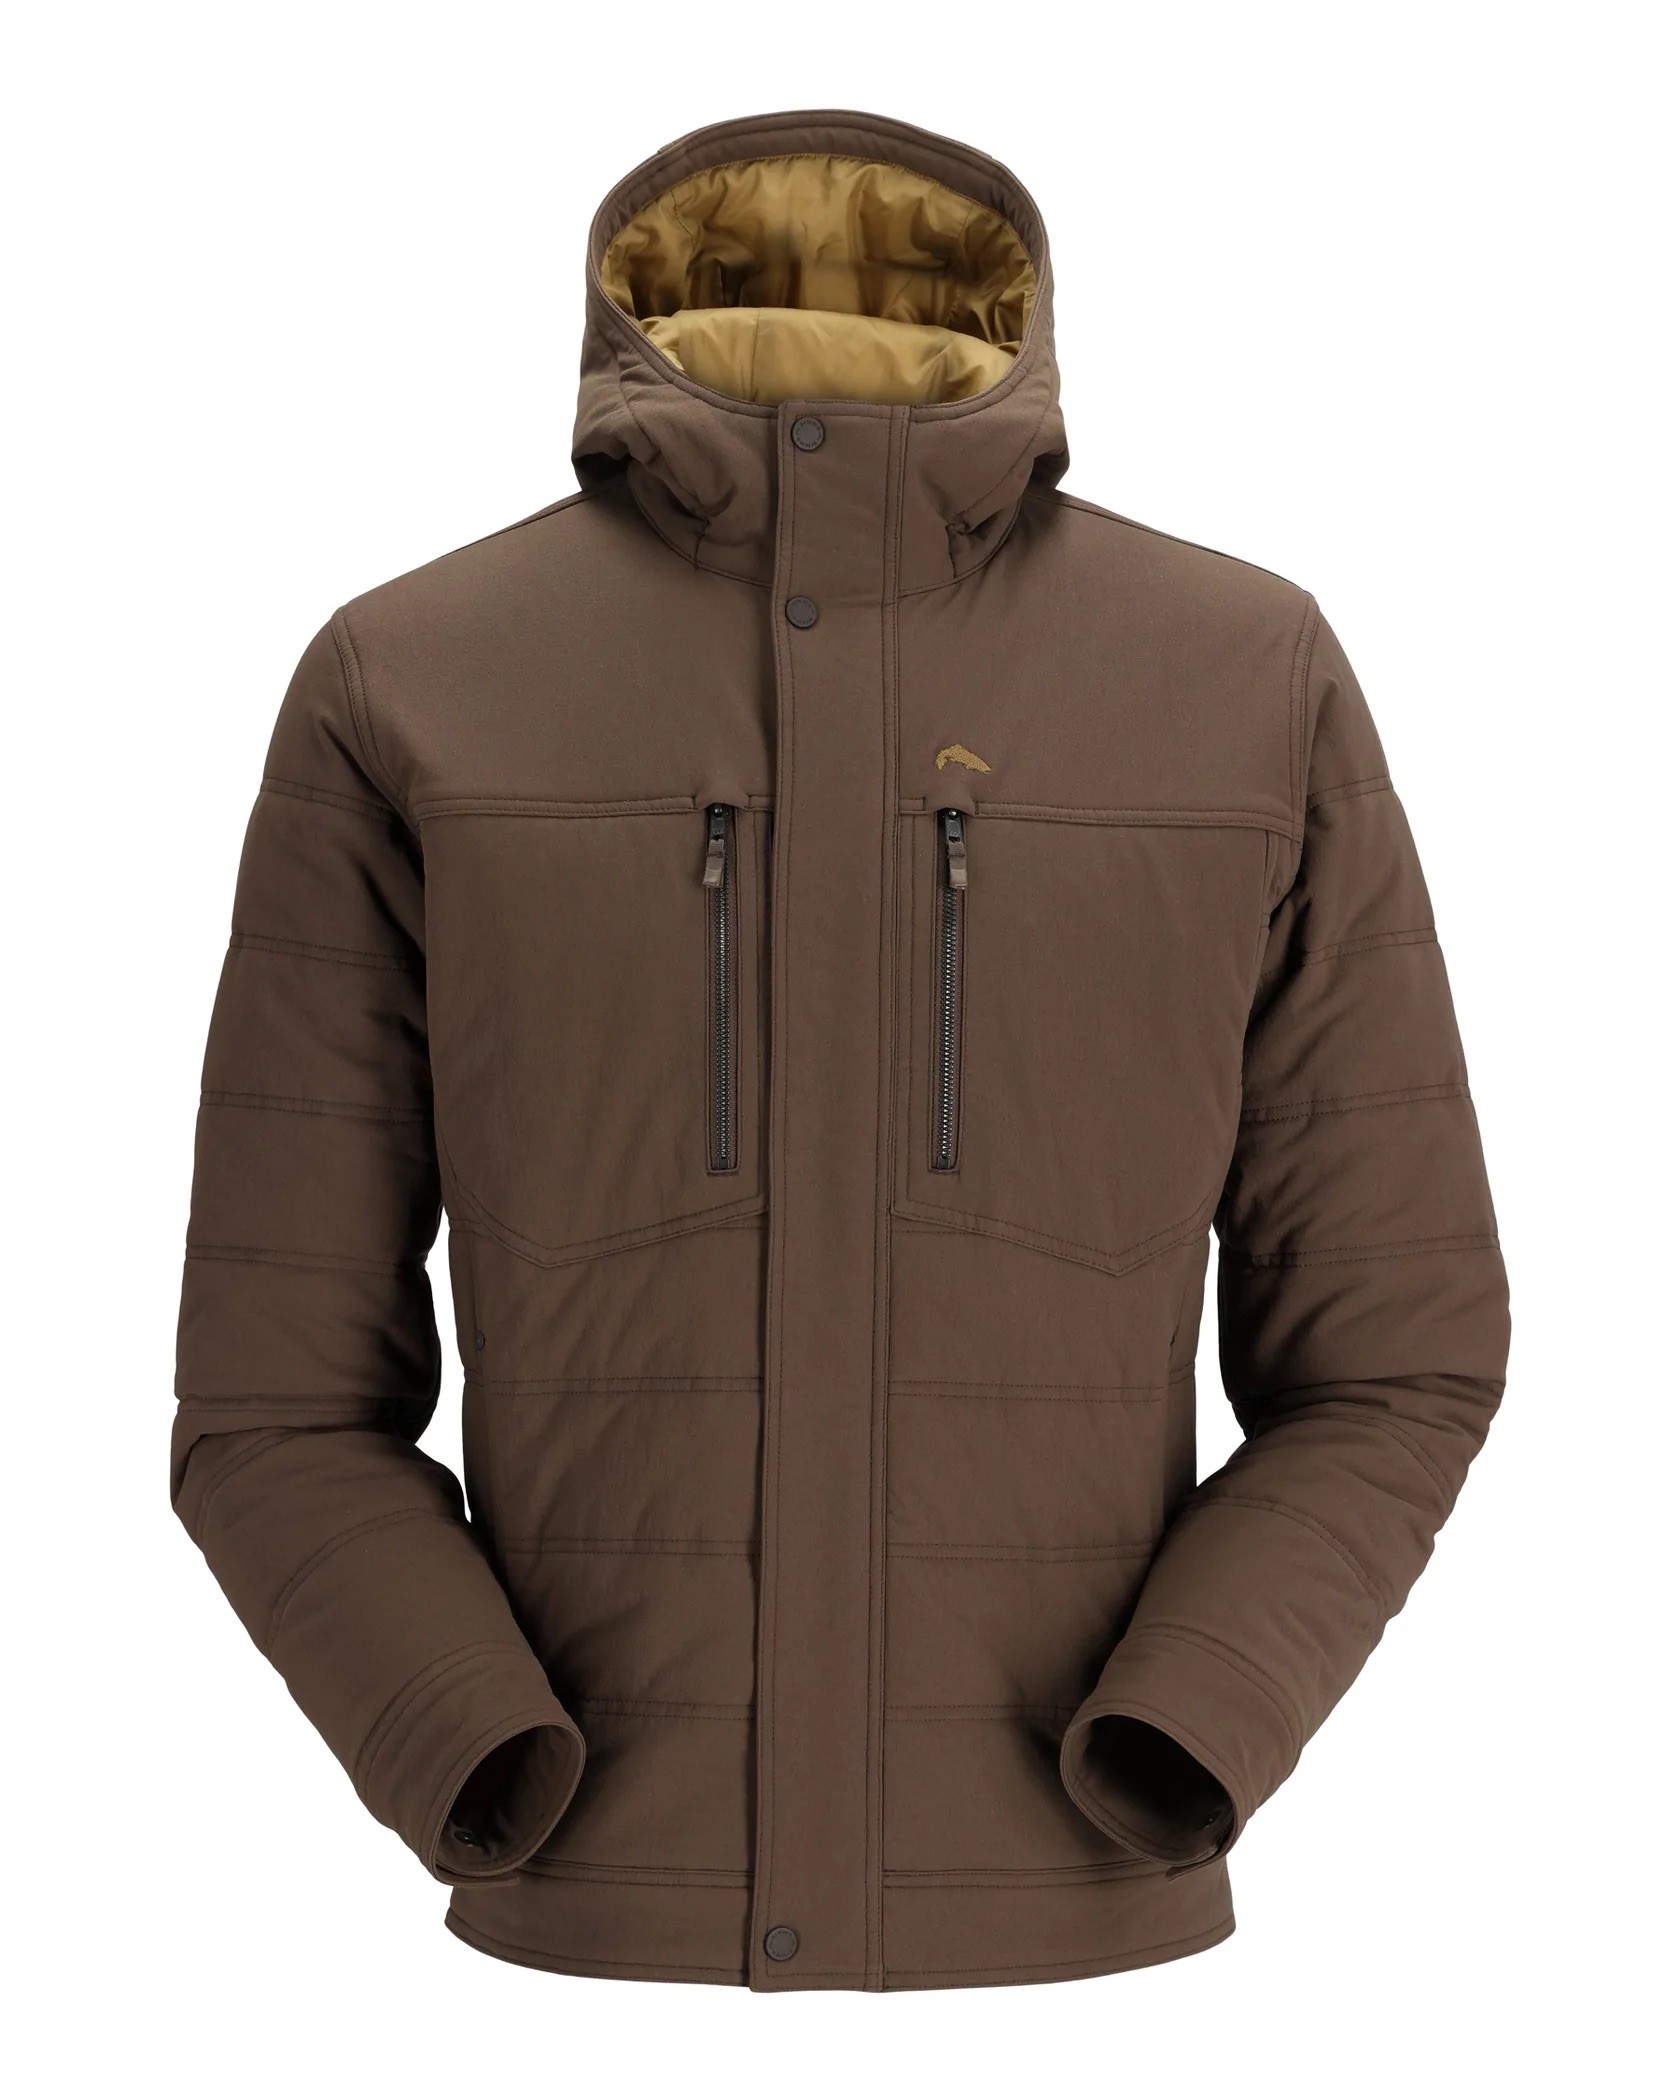 Simms M's Cardwell Hooded Jacket - Hickory - XL